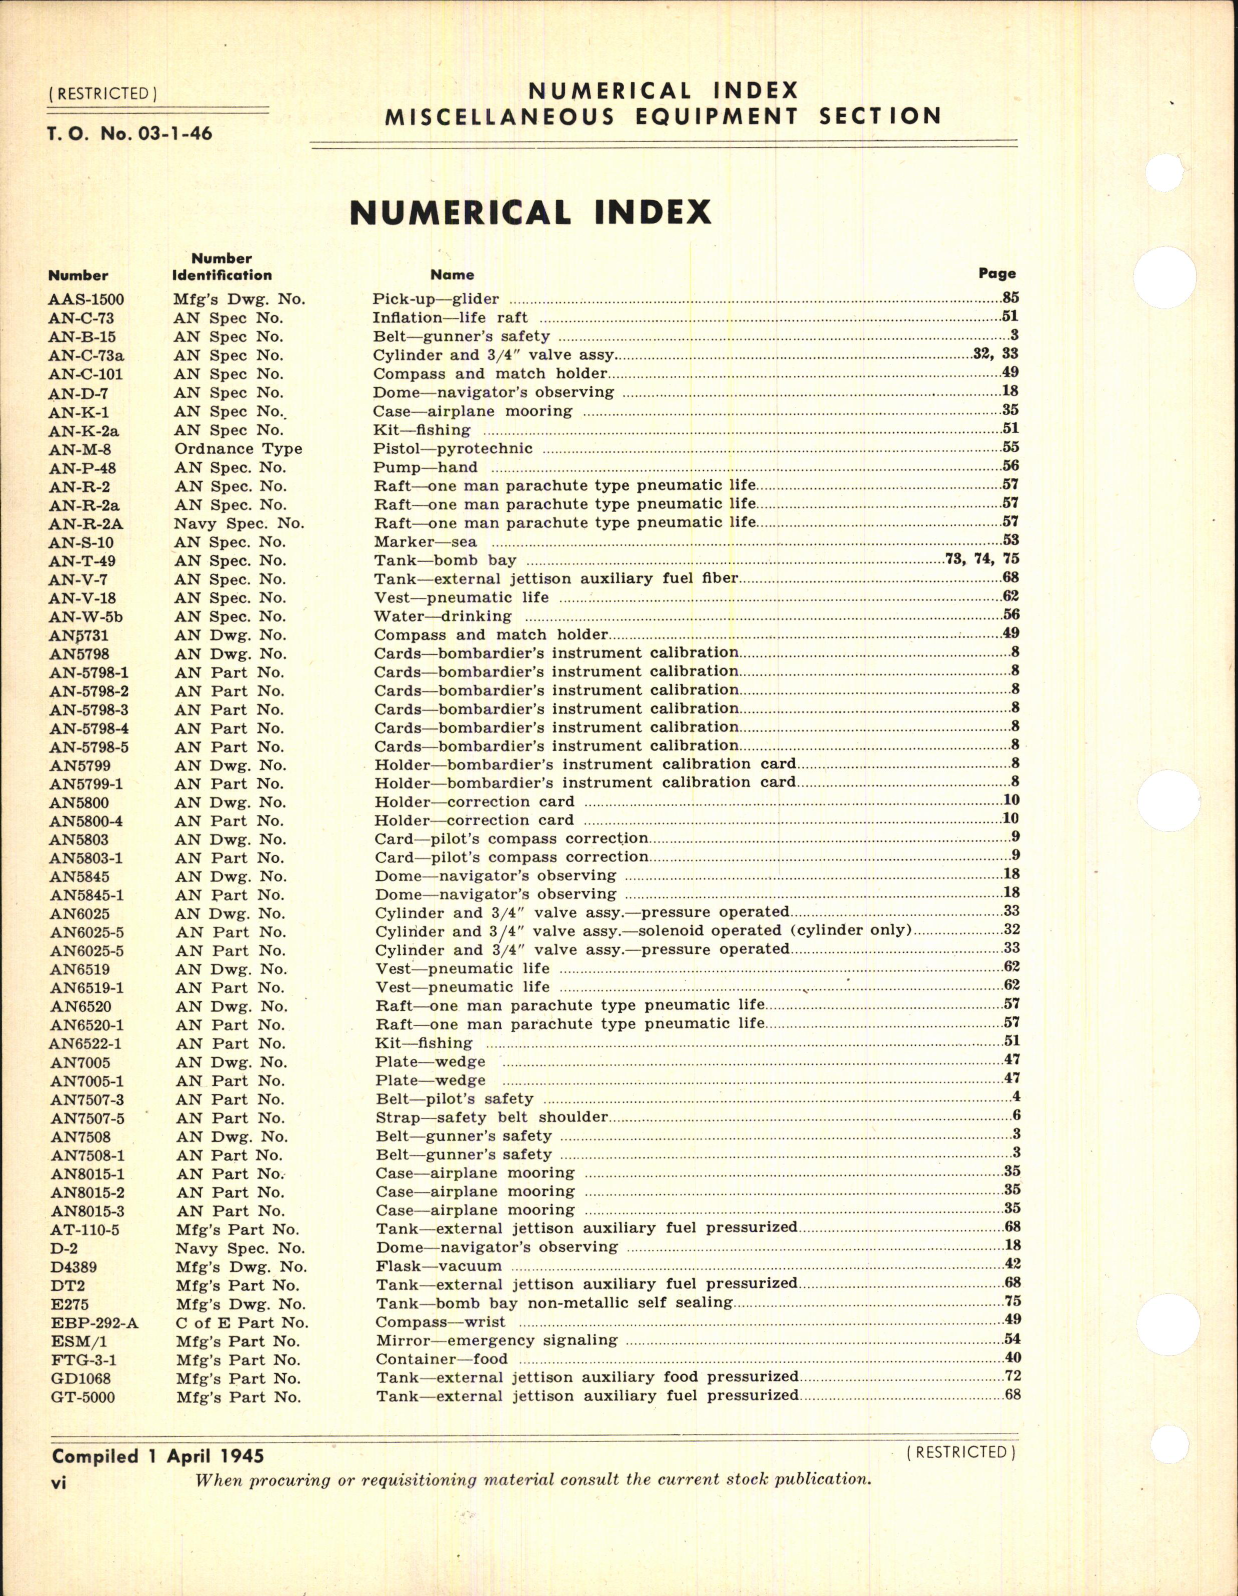 Sample page 8 from AirCorps Library document: Index of Army-Navy Aeronautical Equipment - Miscellaneous